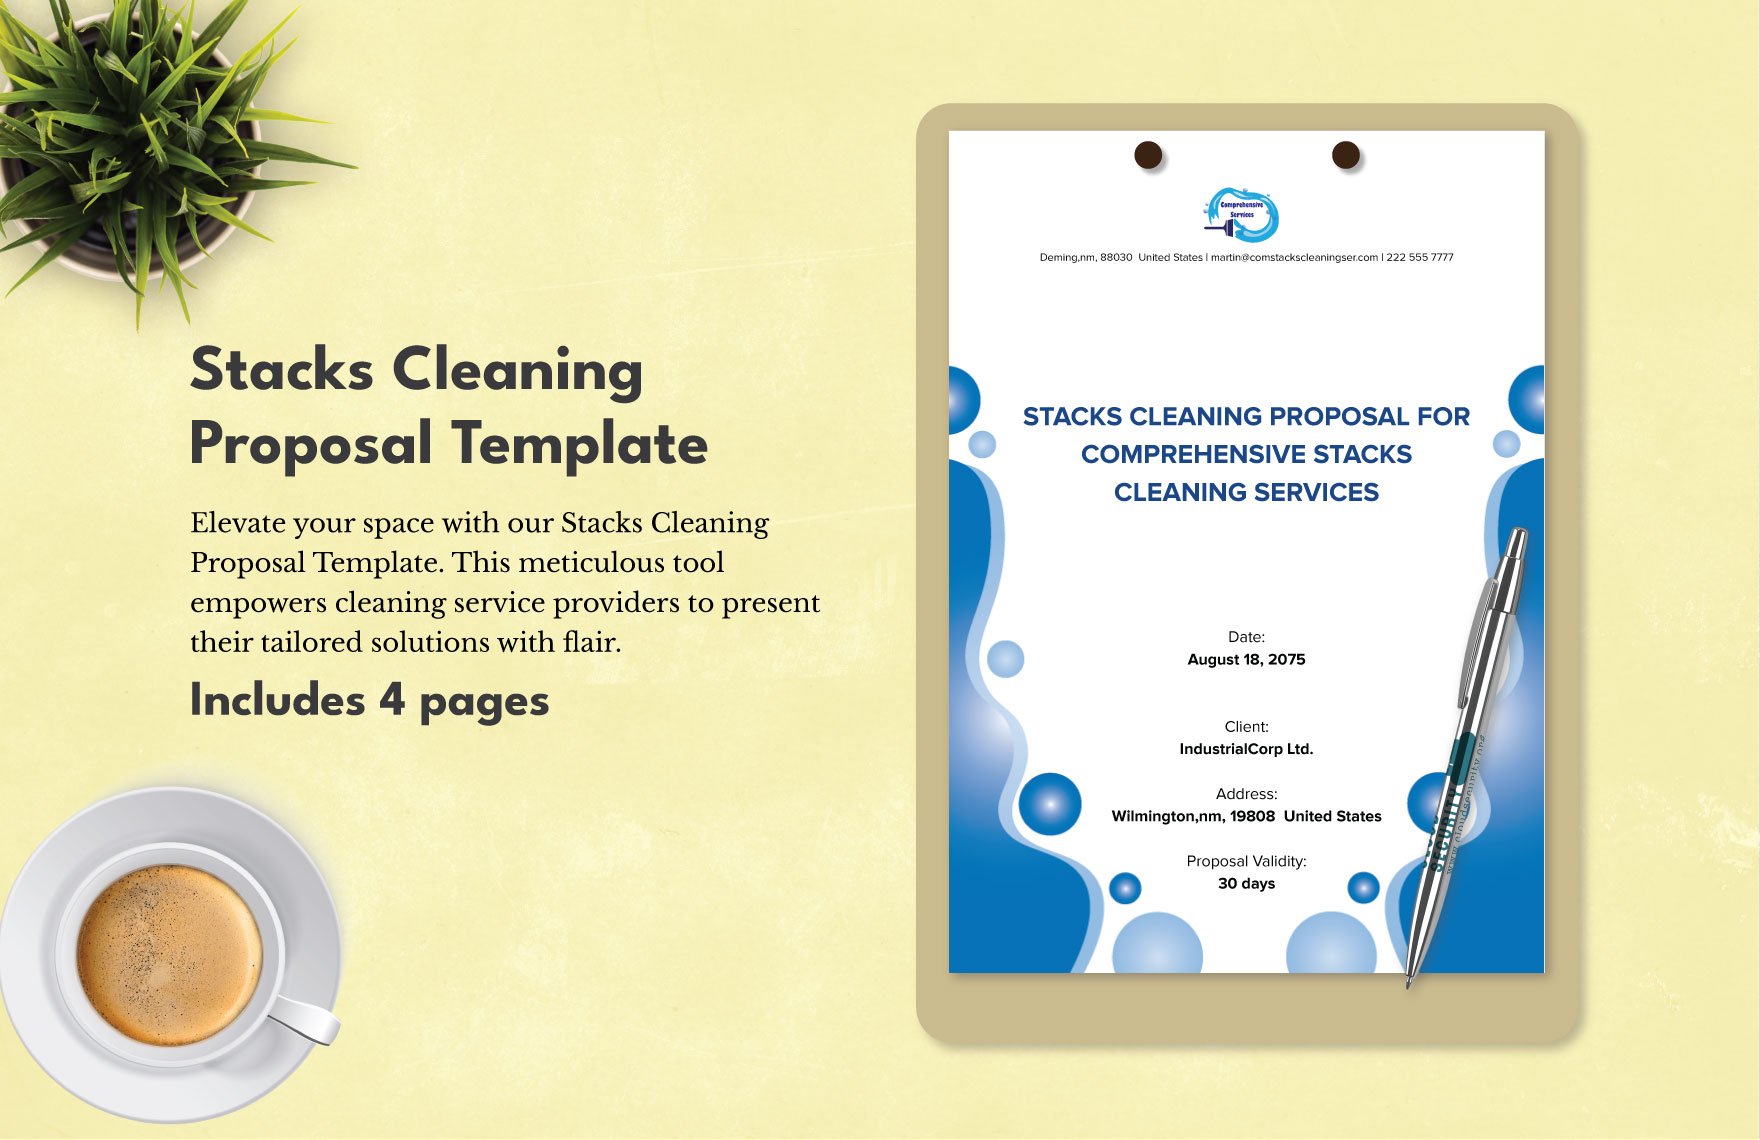 Stacks Cleaning Proposal Template